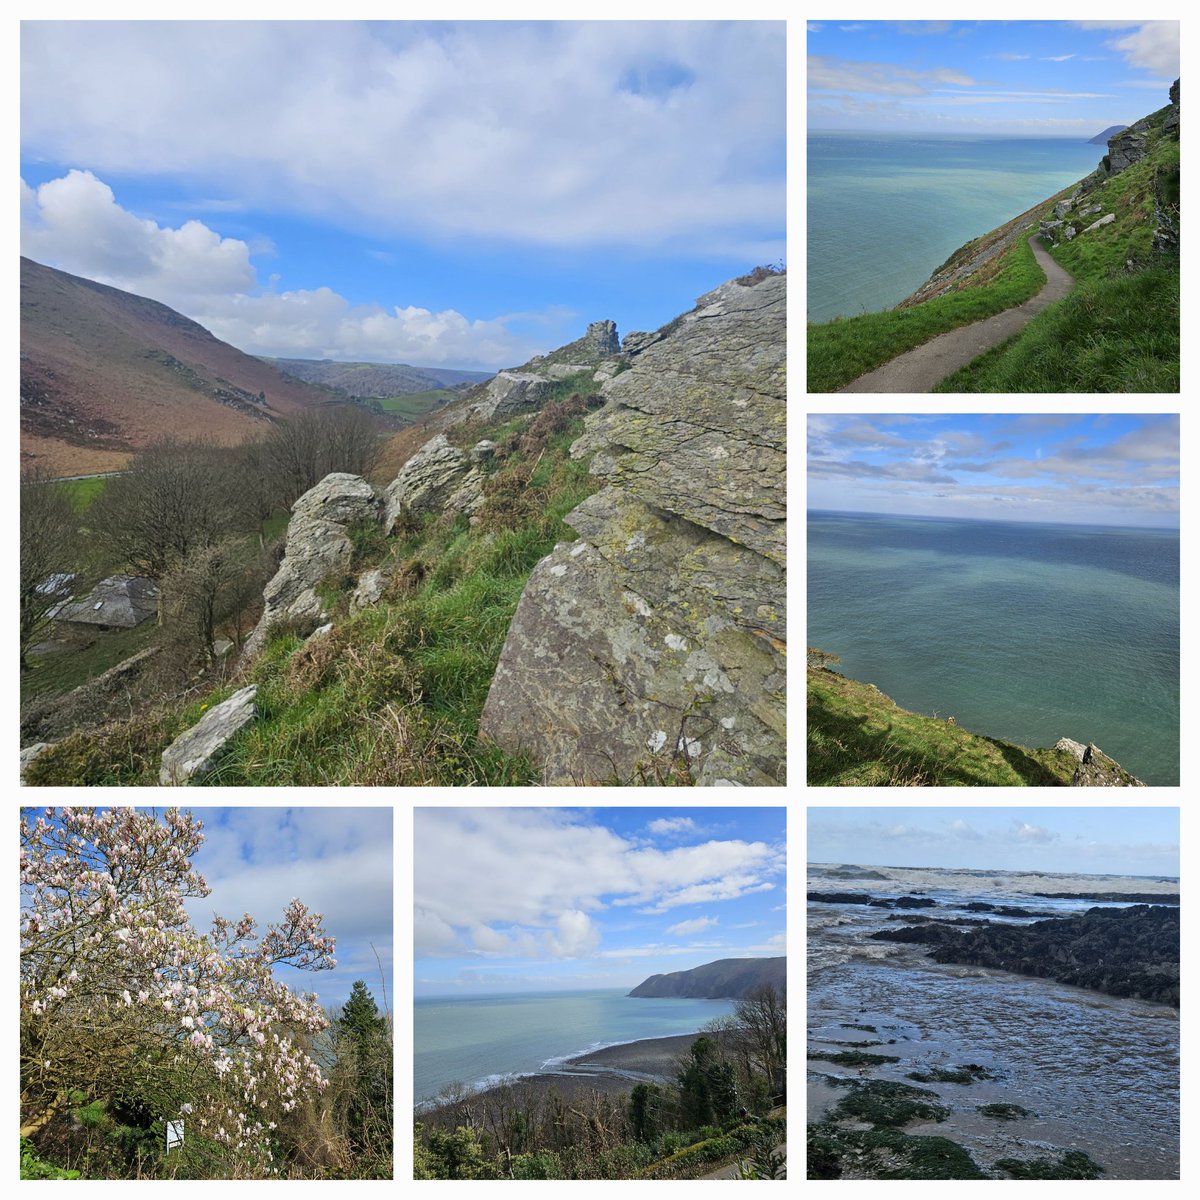 Less ornamental and more scenic #SixonSunday today @EstelleHitchon @RachelMMarsh @AngieLewis_CH and anyone else who likes #NorthDevon #ValleyoftheRocks